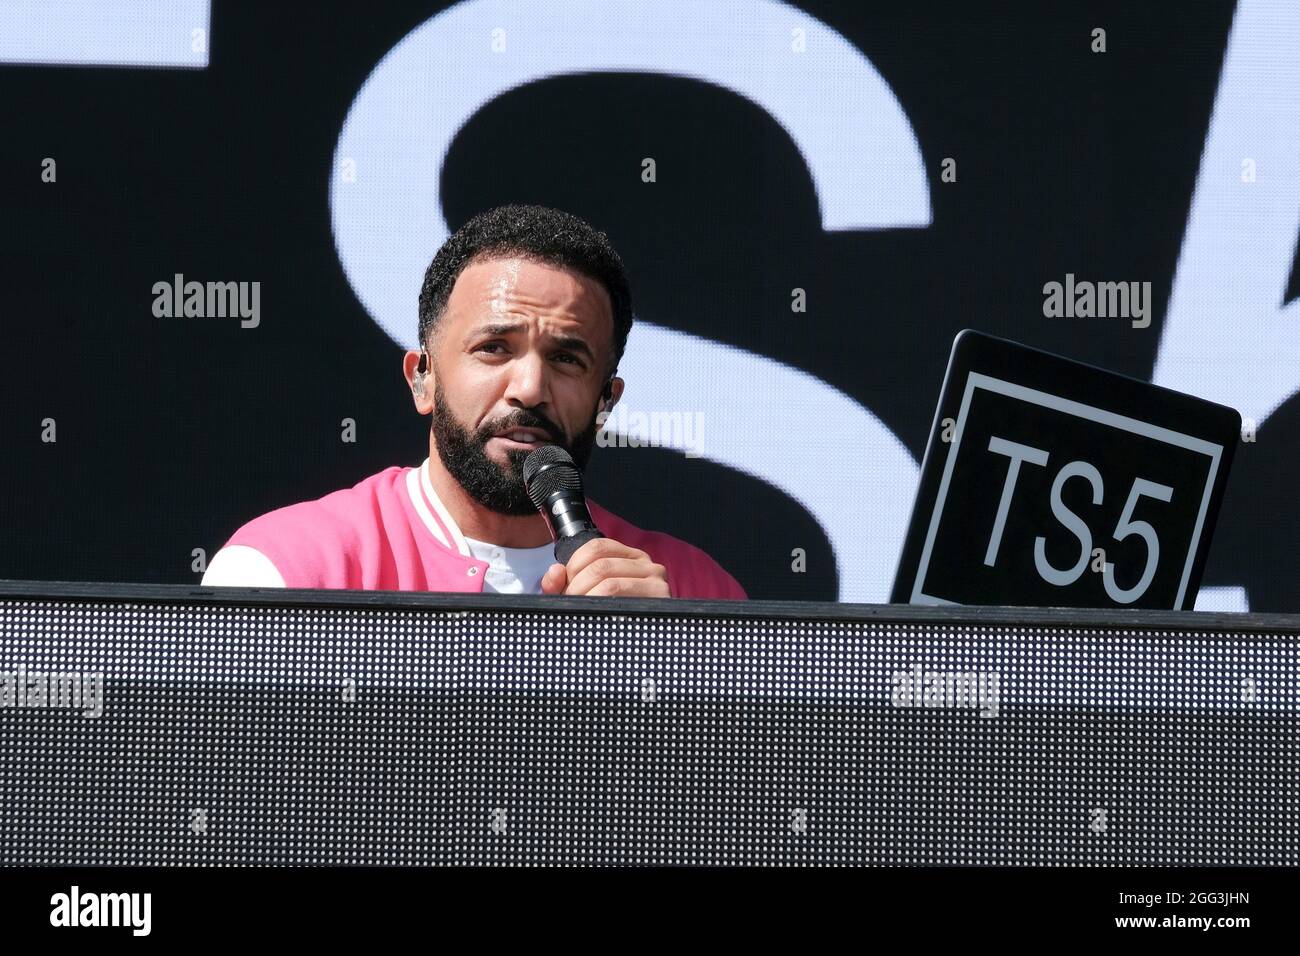 Portsmouth, UK. 28th Aug, 2021. Craig Ashley David MBE singer, songwriter, rapper, record producer and DJ performs his Craig David TS5 dj and vocal set live on stage during the Victorious Festival in Southsea. Credit: SOPA Images Limited/Alamy Live News Stock Photo